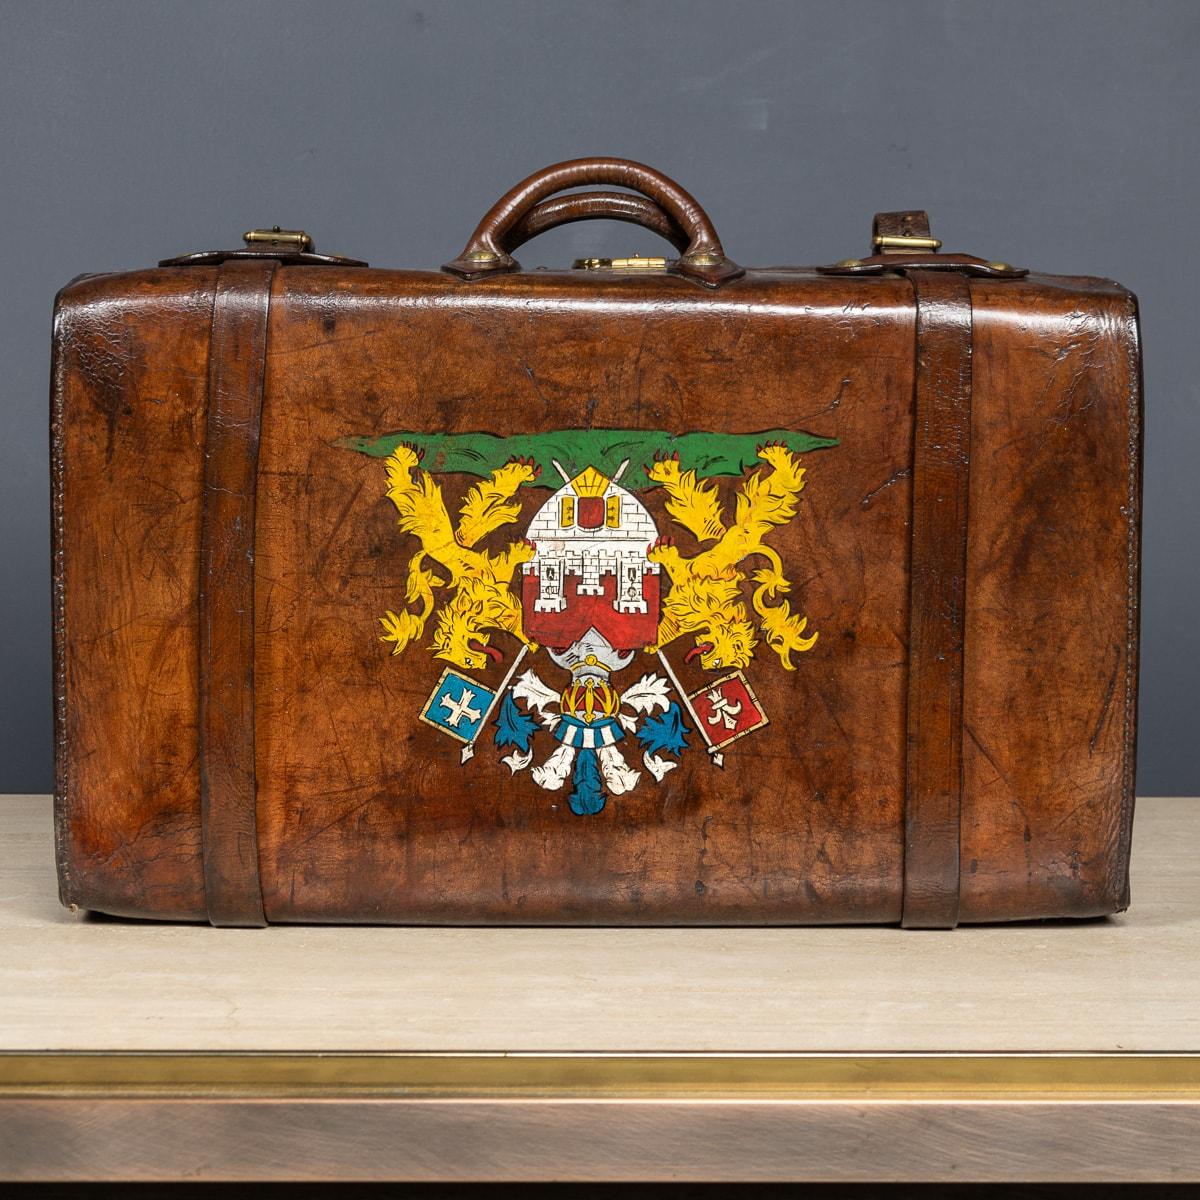 British Antique 19th Century Victorian Leather Suitcase With Painted Crest c.1850 For Sale